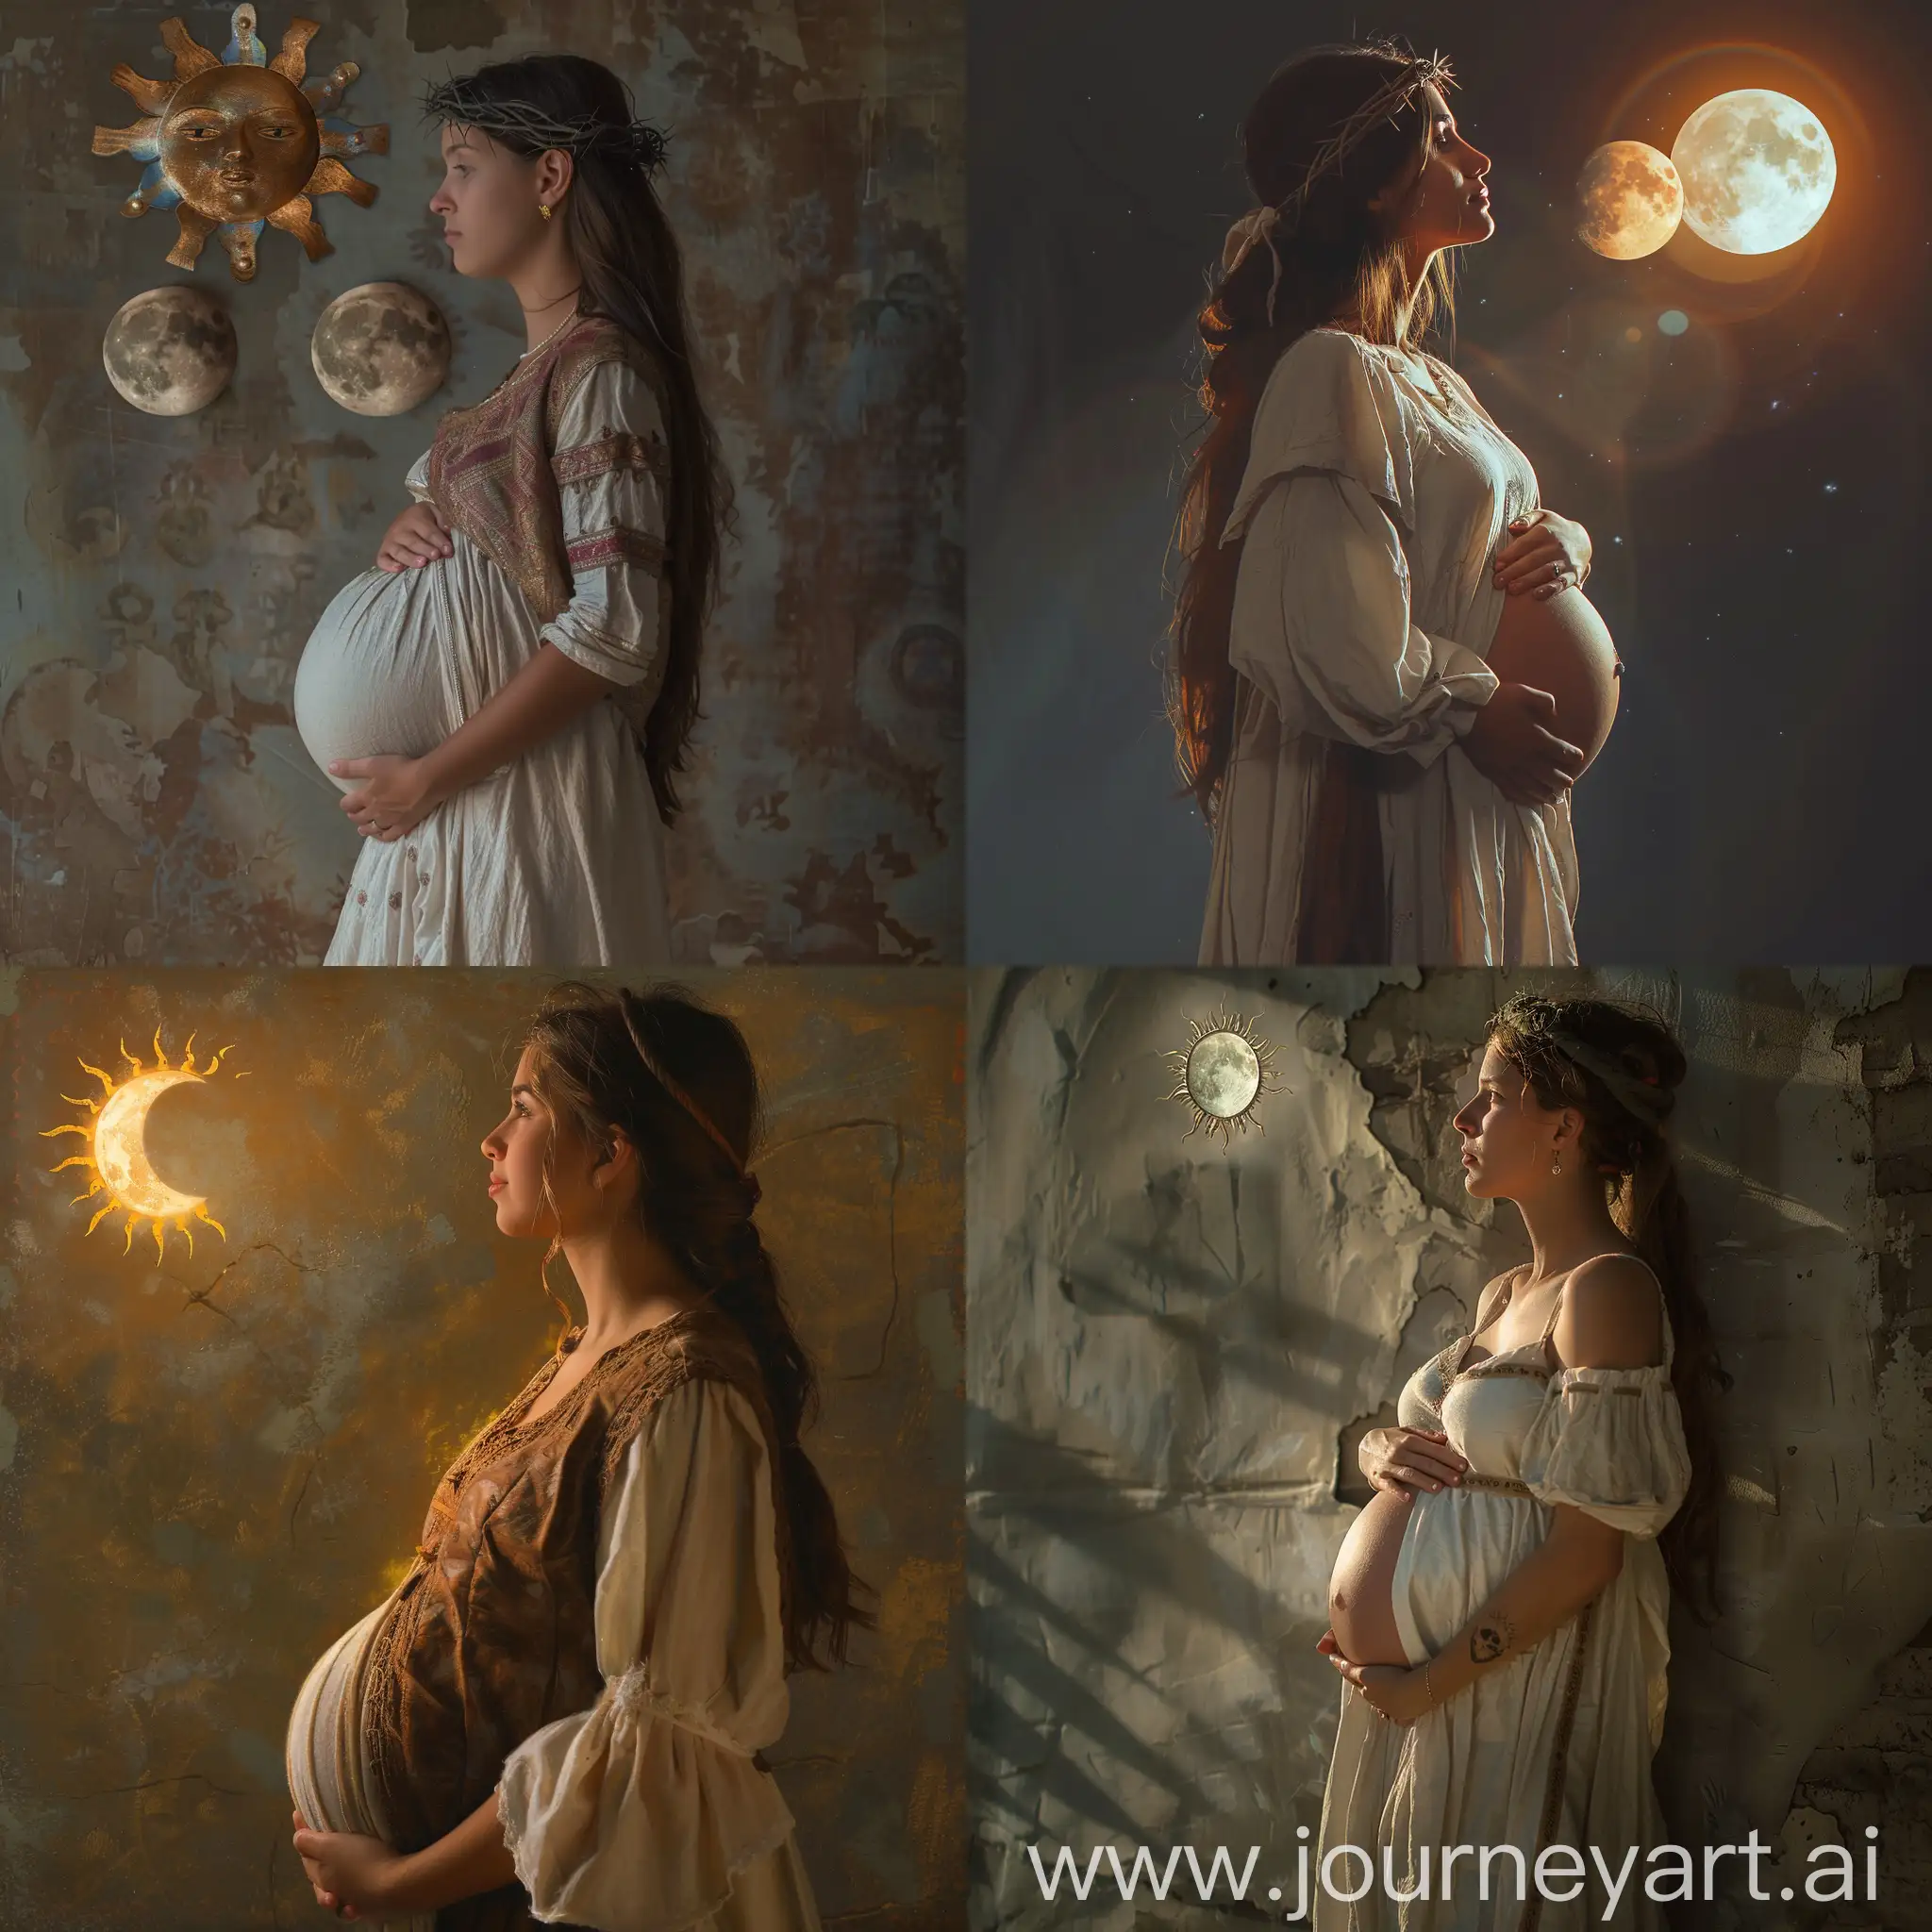 Pregnant-Woman-in-Ancient-Attire-Contemplating-Sun-and-Moon